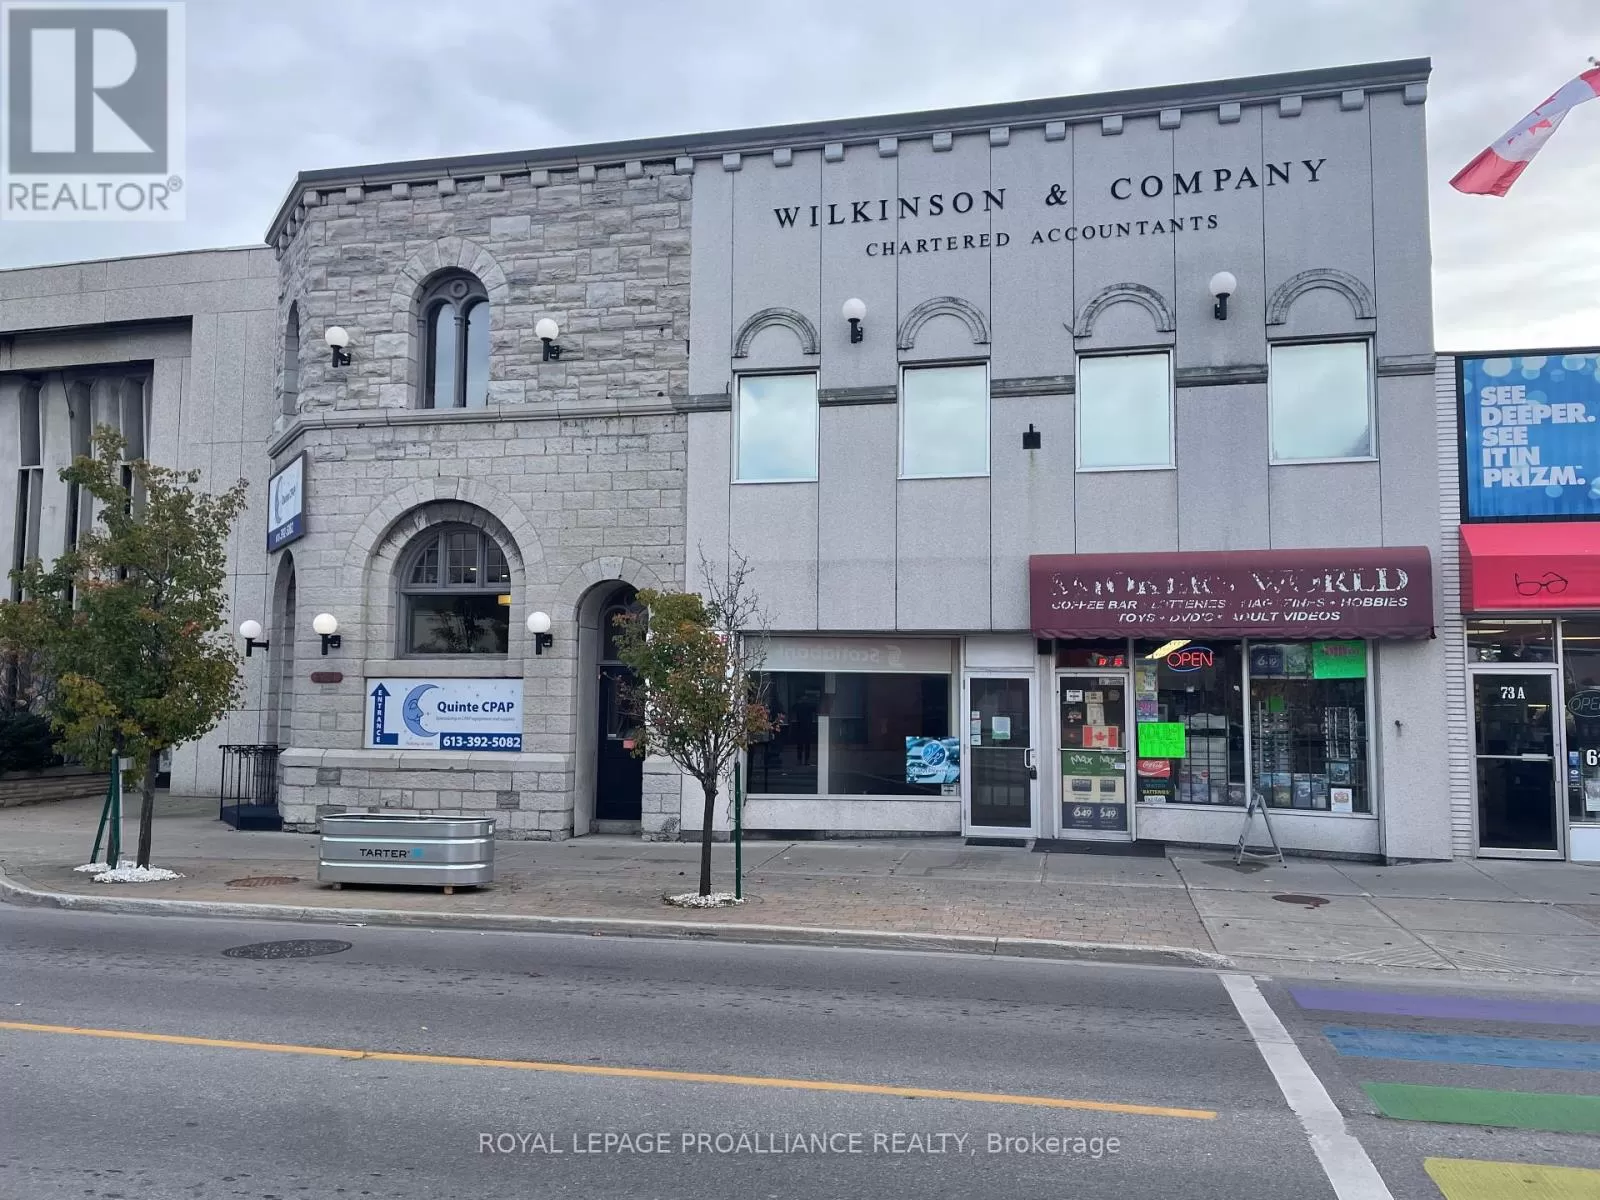 Offices for rent: 69-71 Dundas St W, Quinte West, Ontario K8V 3P4